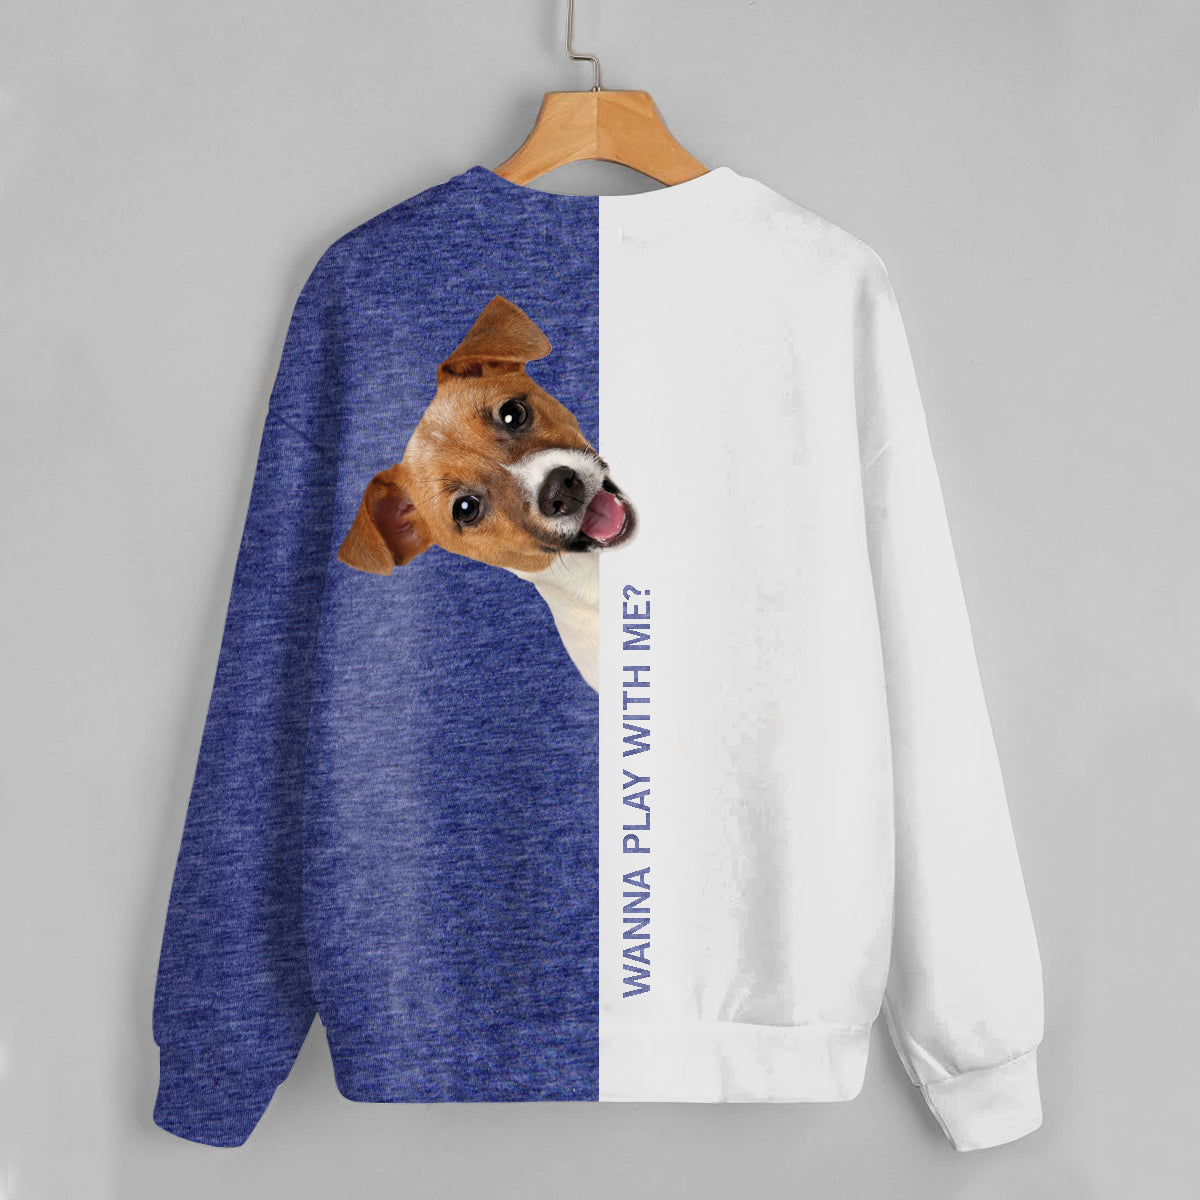 Funny Happy Time - Jack Russell Terrier Sweatshirt V1